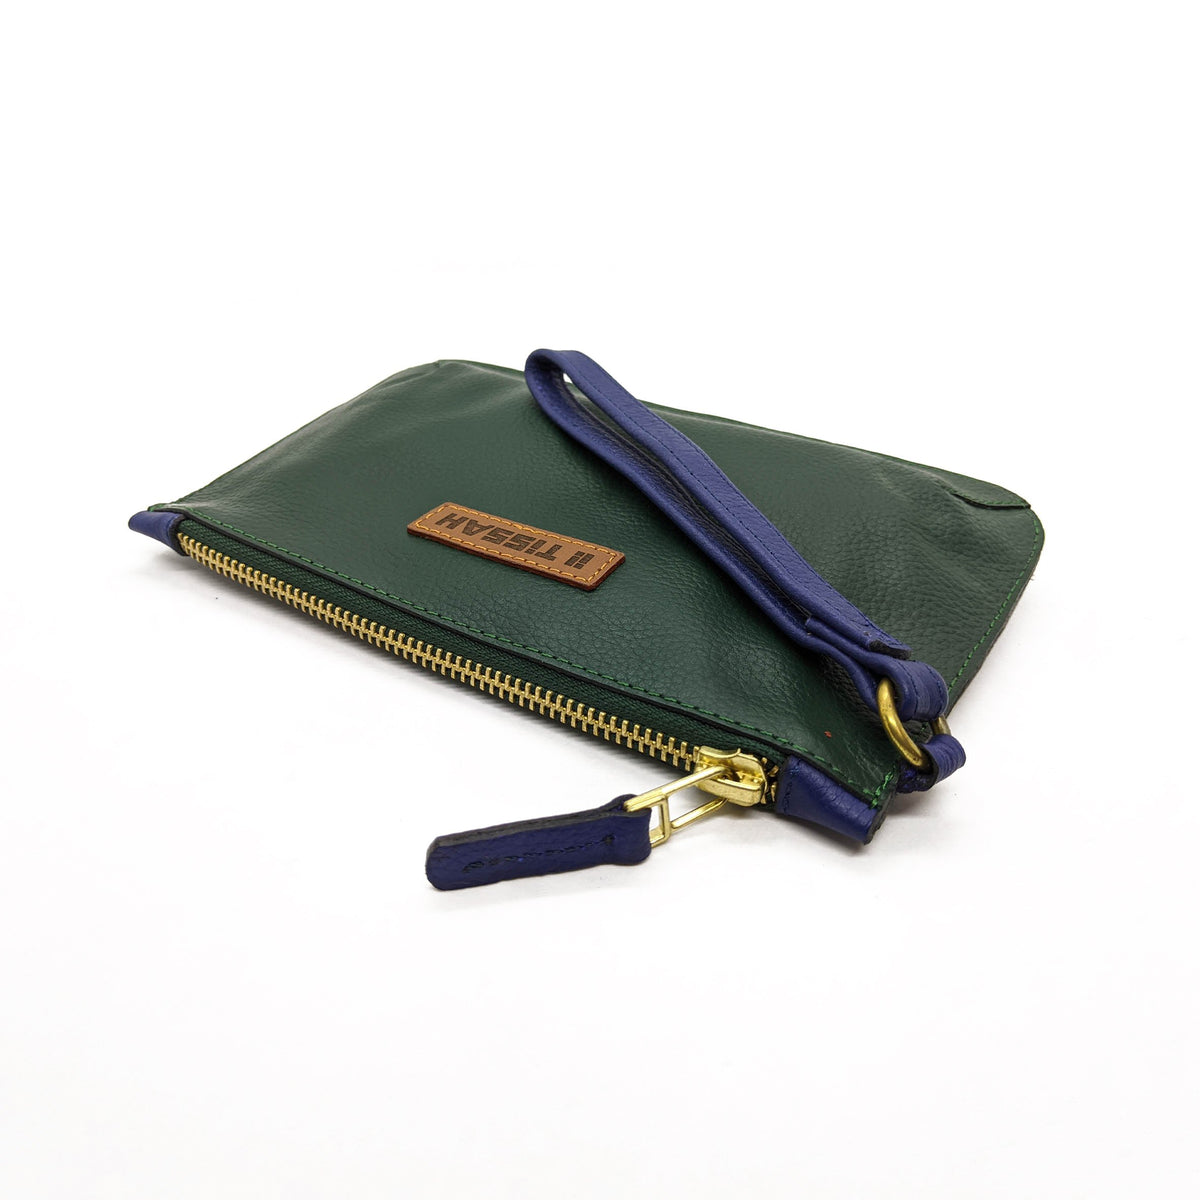 Wristlet - Green with Blue trimmings